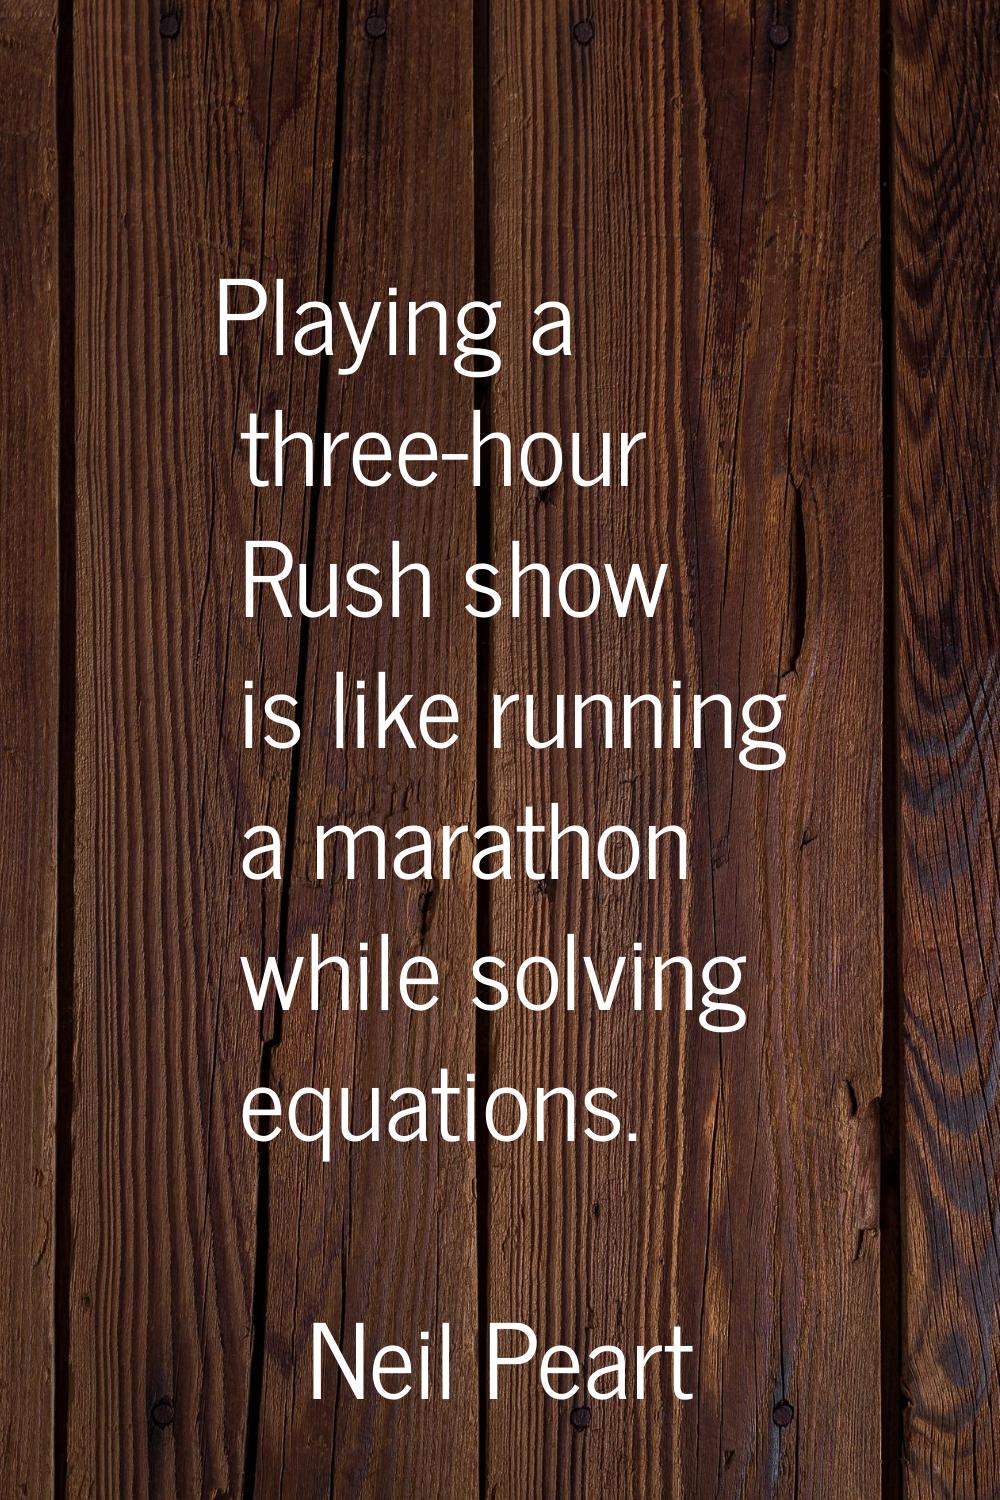 Playing a three-hour Rush show is like running a marathon while solving equations.